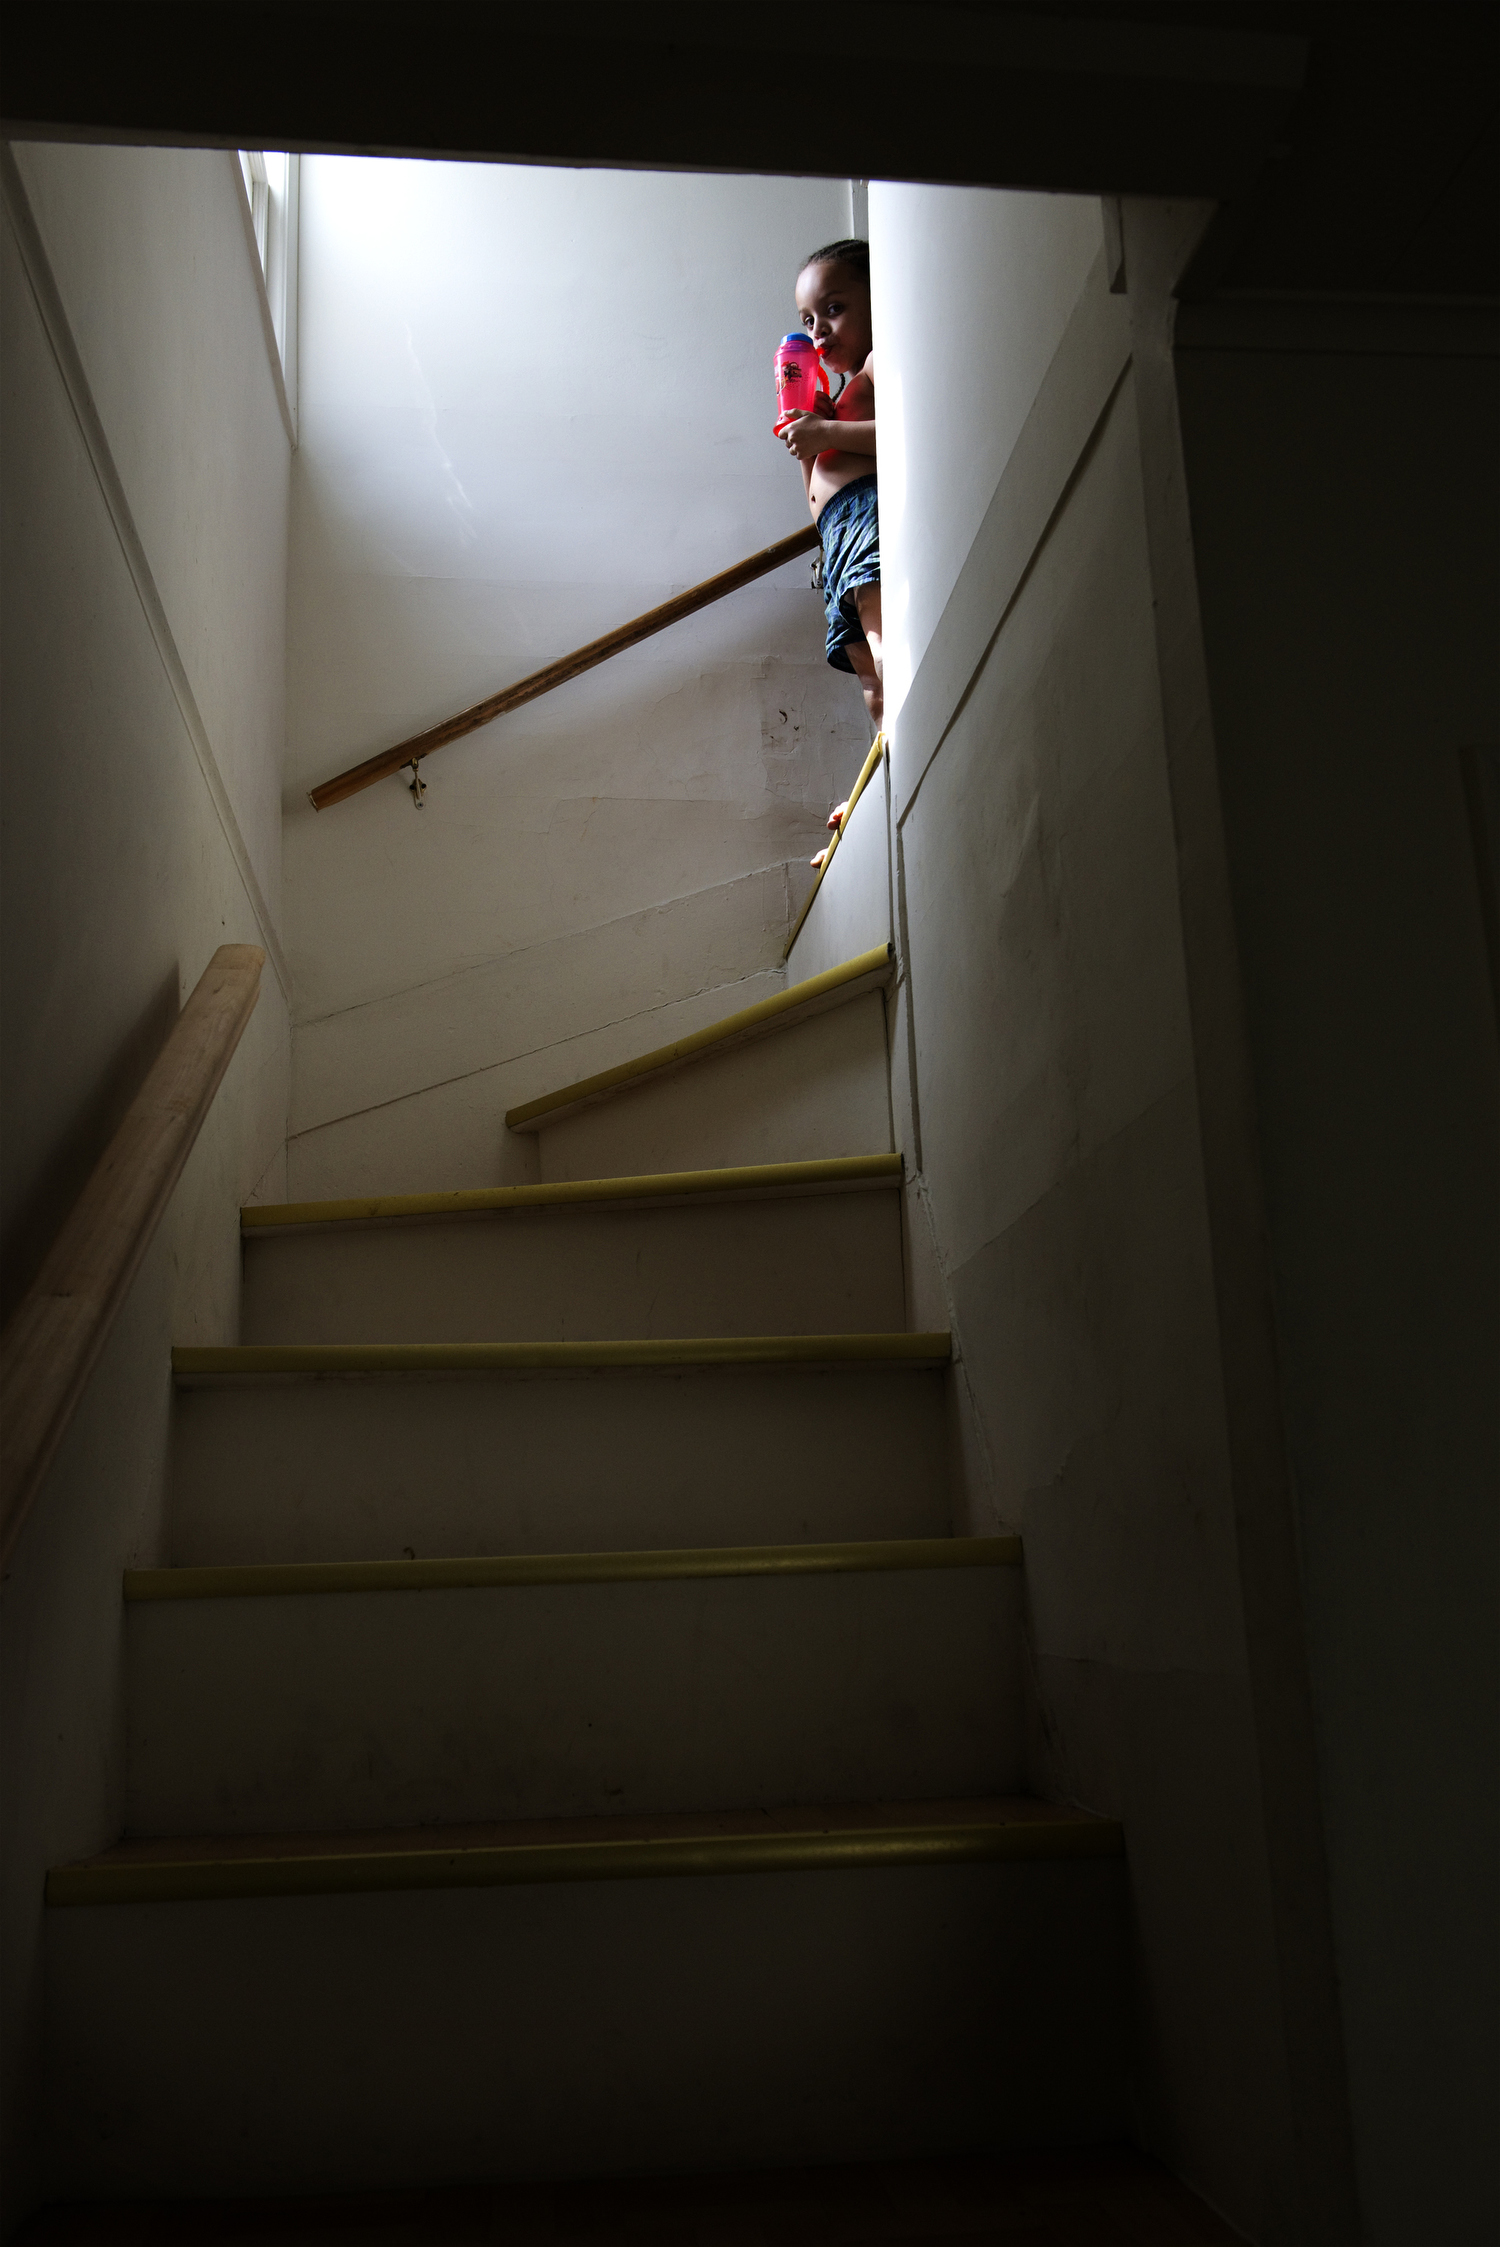  Jesiel Huertas, 4, waits at the top of the stairs for his mom to help him get dressed for school. 